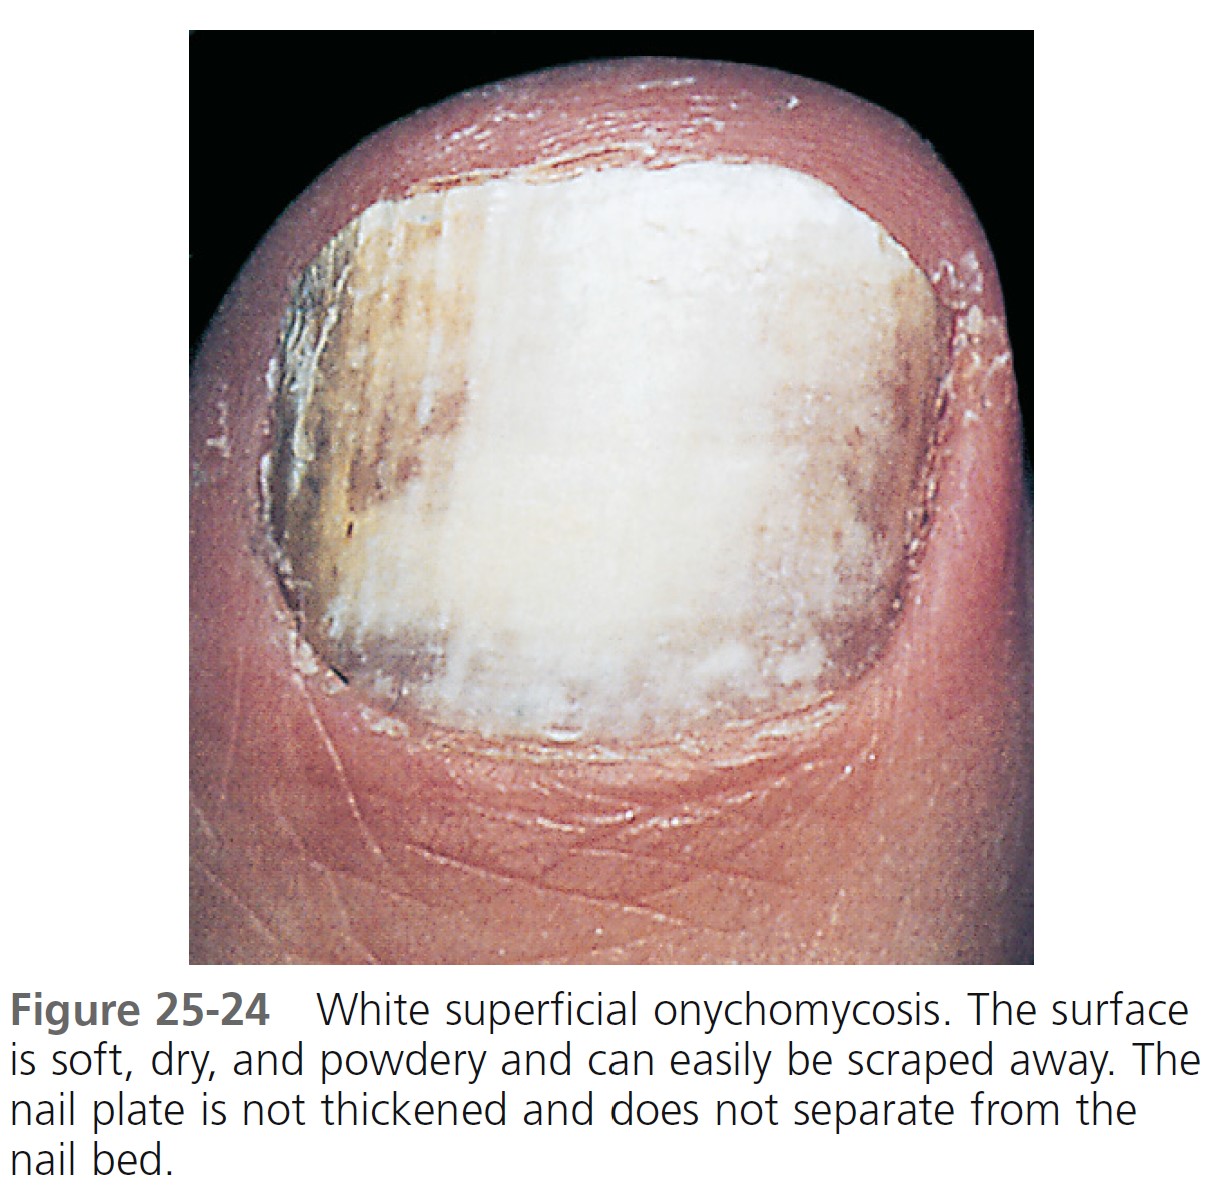 Common Toenail Injuries in Athletes - Sports Medicine Review